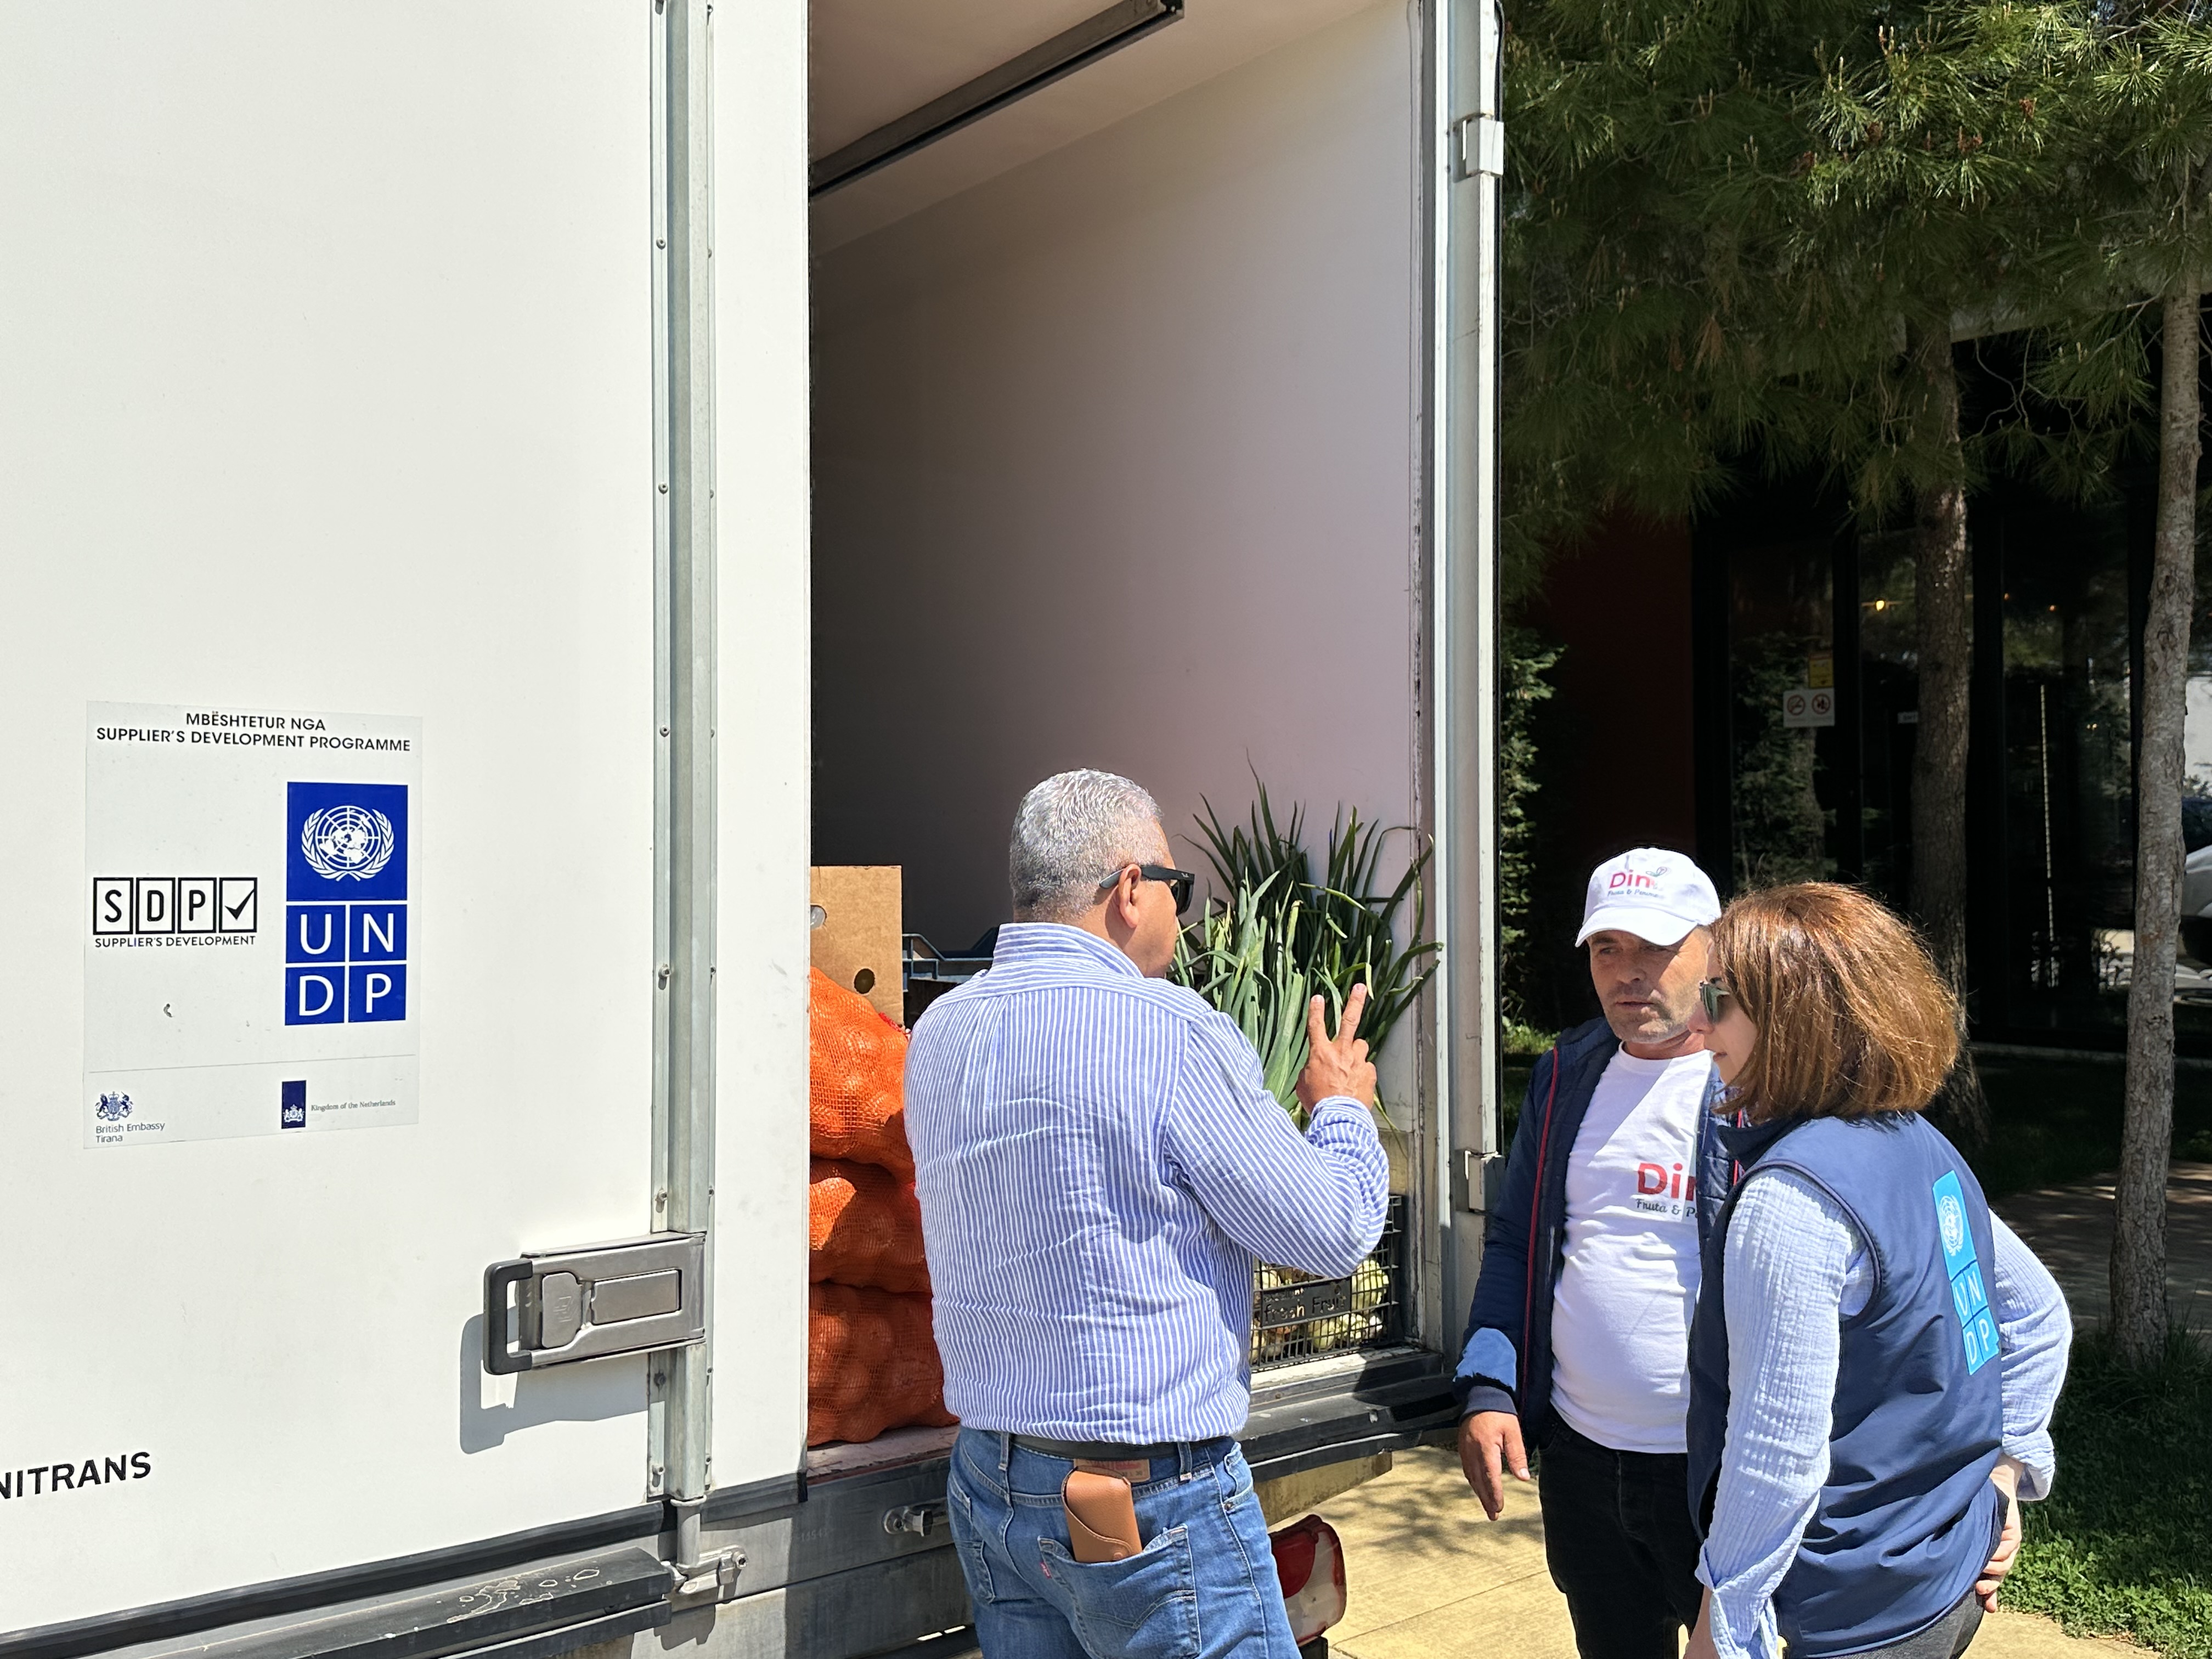 UNDP's Suppliers Development Project, under the guidance of the Economic Recovery and Resilience (ERR) programme, provided hope for micro, small, and medium-sized Albanian businesses affected by the 2019 earthquake and the COVID-19 pandemic.